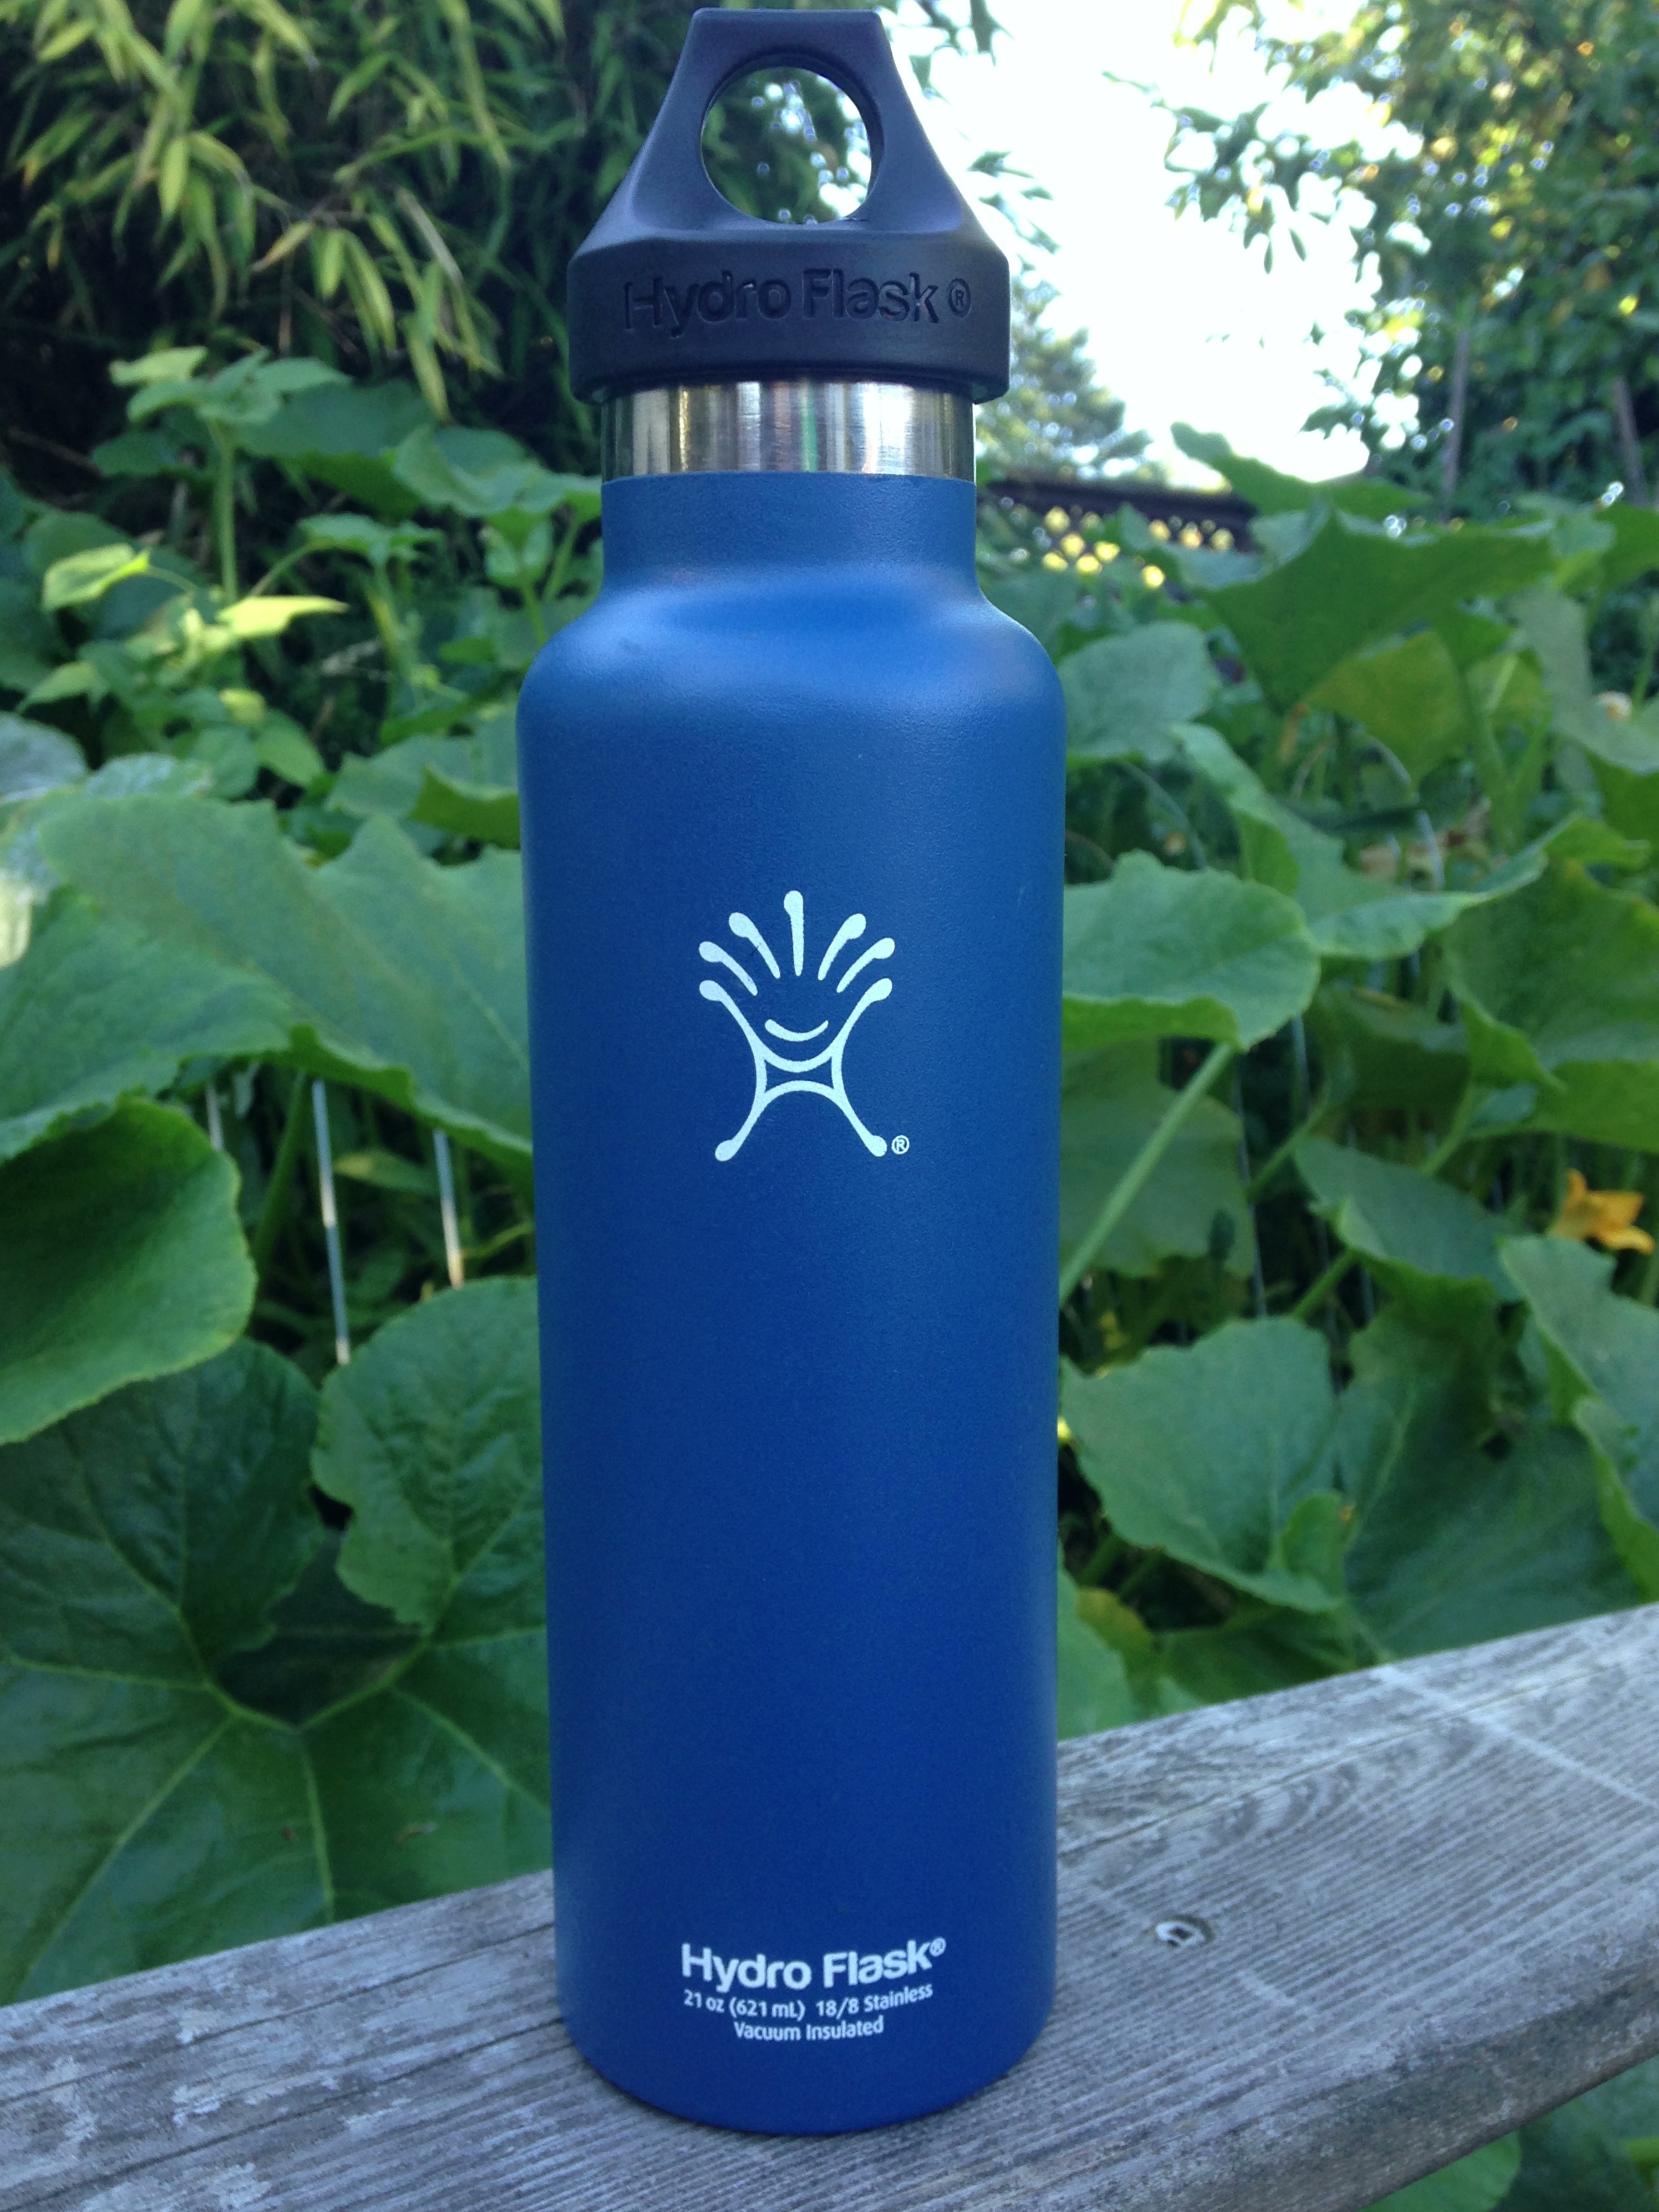 For Beer (And A Lot More): Hydro Flask Vacuum-Insulated Stainless